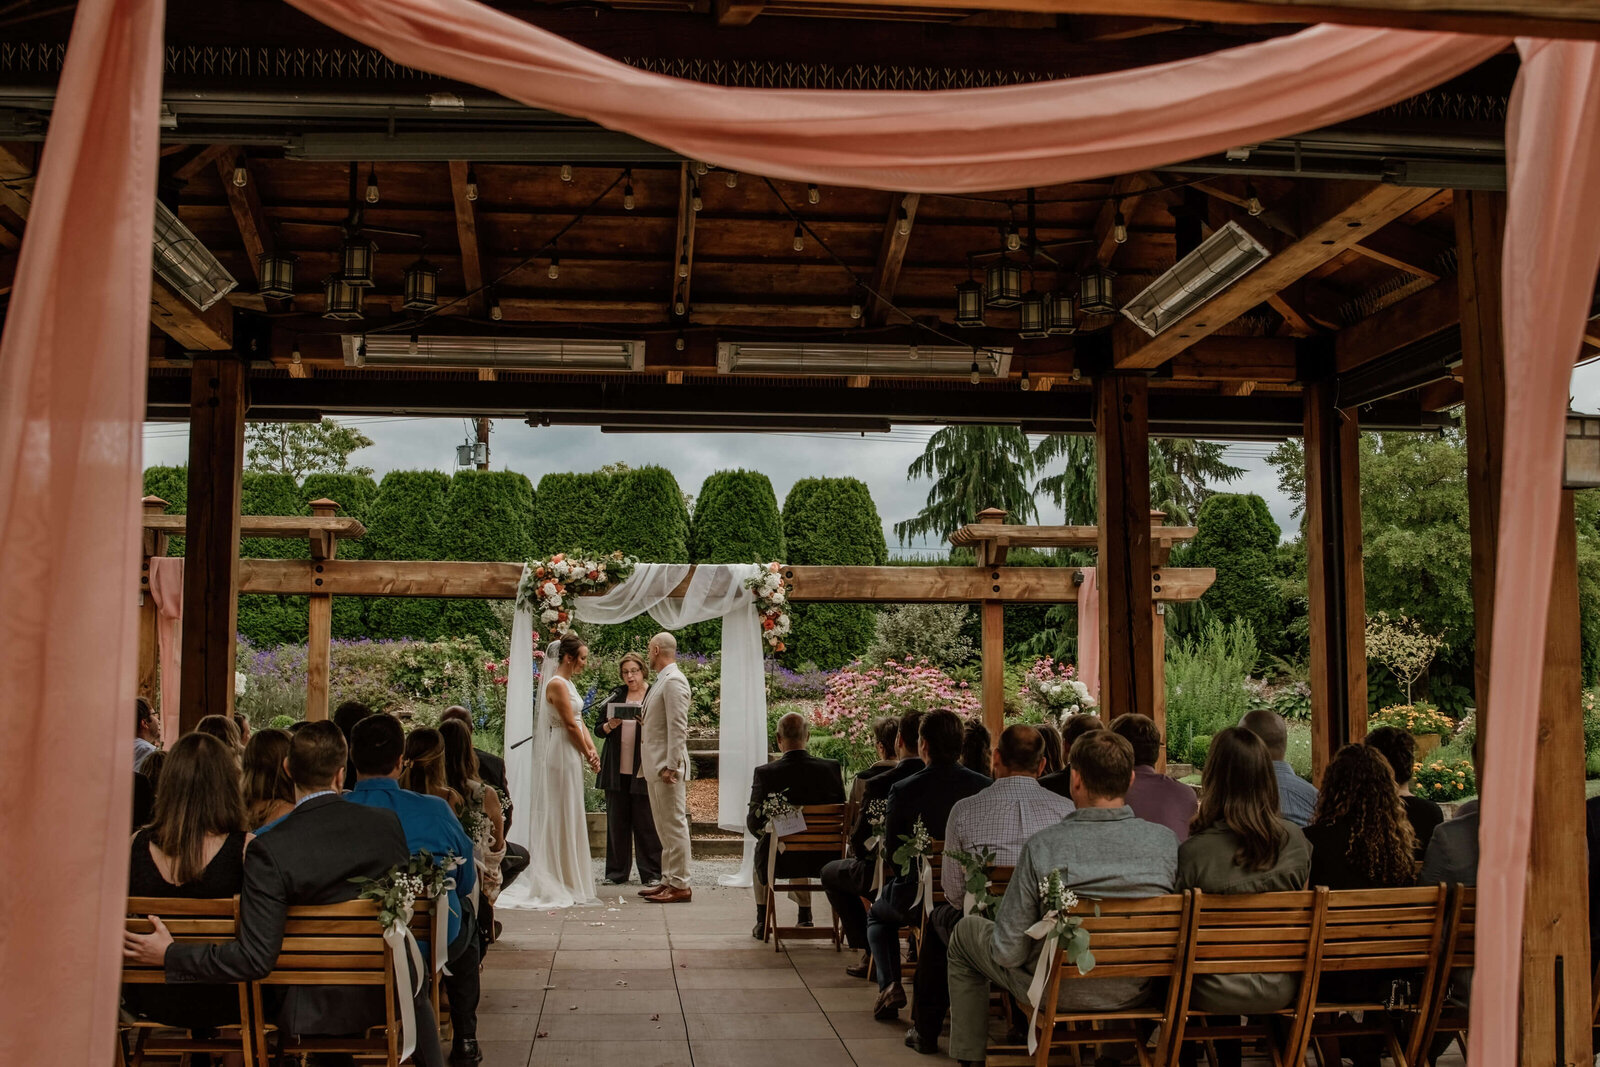 Wedding ceremony at winery in Woodinville.